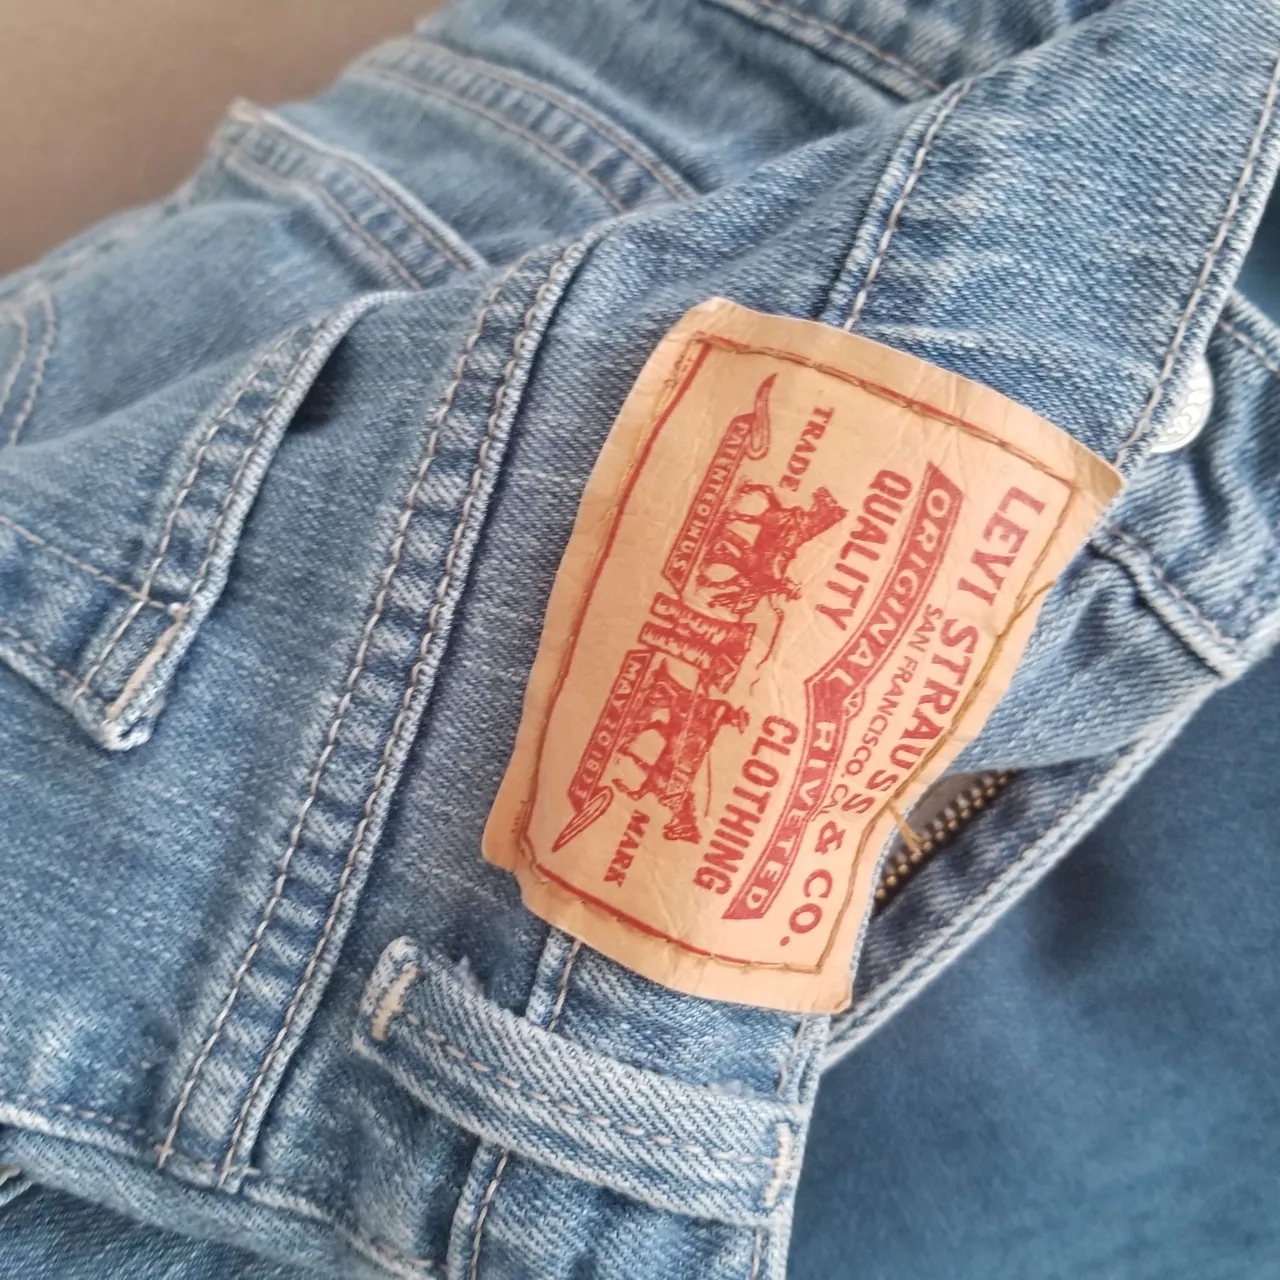 LEVIS FOR YOUR BUTT photo 9